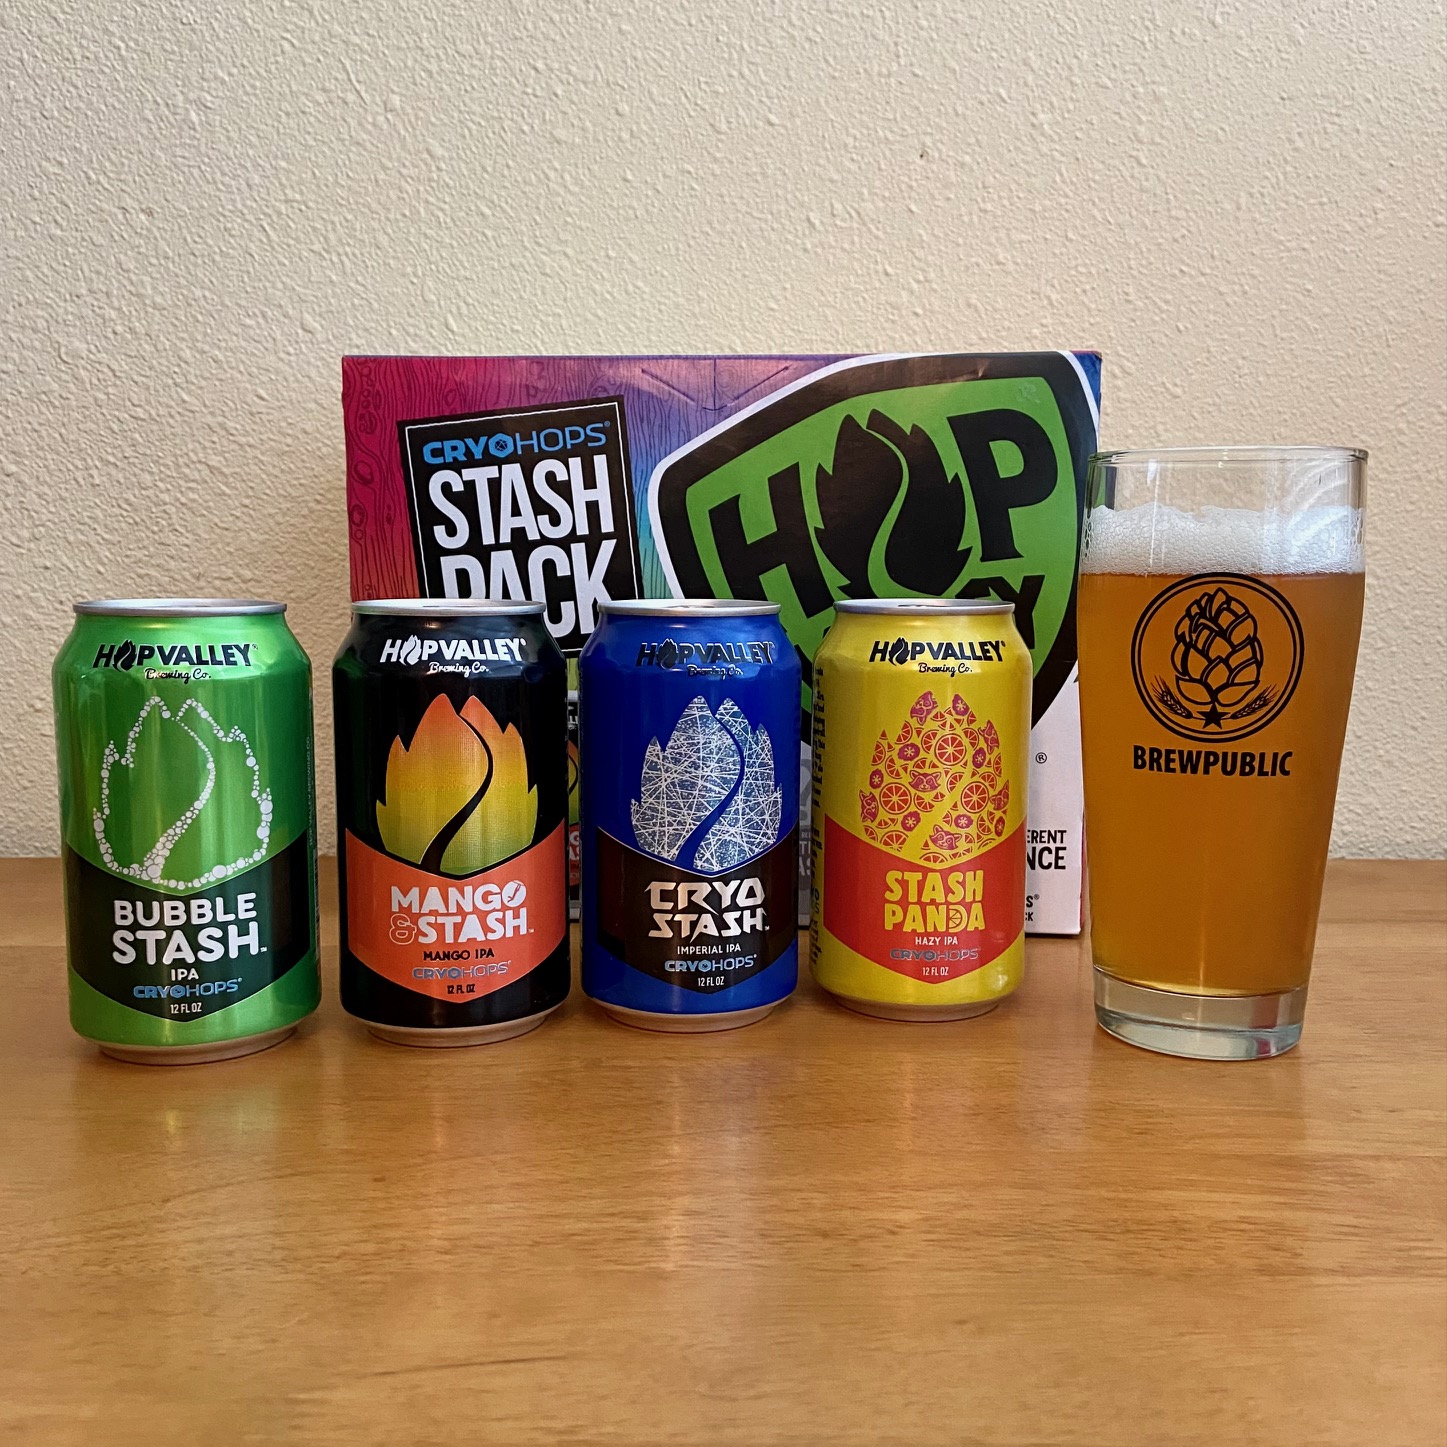 Hop Valley Brewing offers up the Cryo Hops Stash Pack that features Bubble Stash, Cryo Stash, Mango Stash. and the Mystery Stash that's currently Stash Panda.